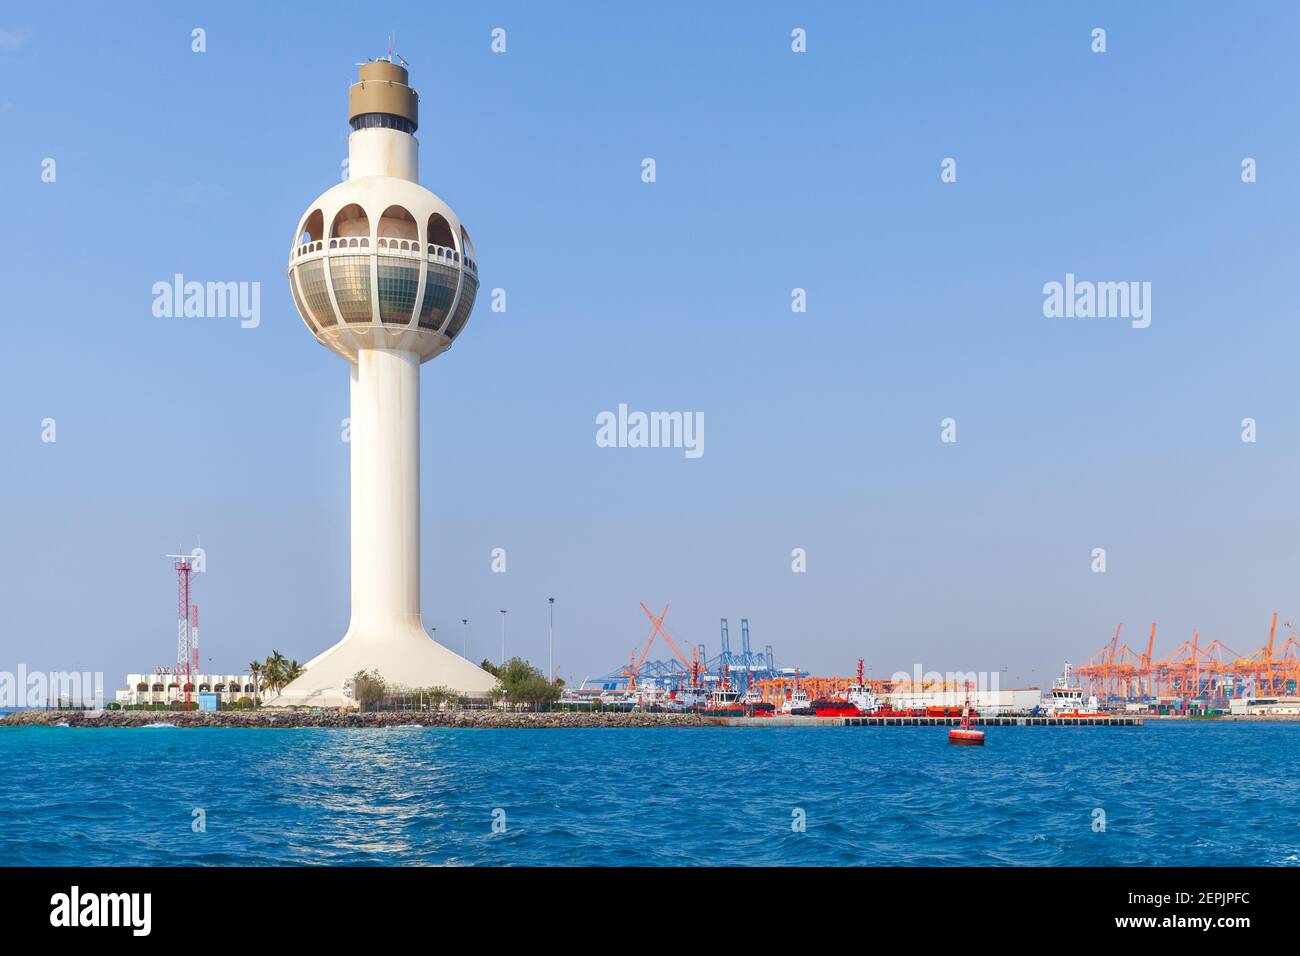 White lighthouse and traffic control tower as a symbol of the port of Jeddah, Saudi Arabia Stock Photo